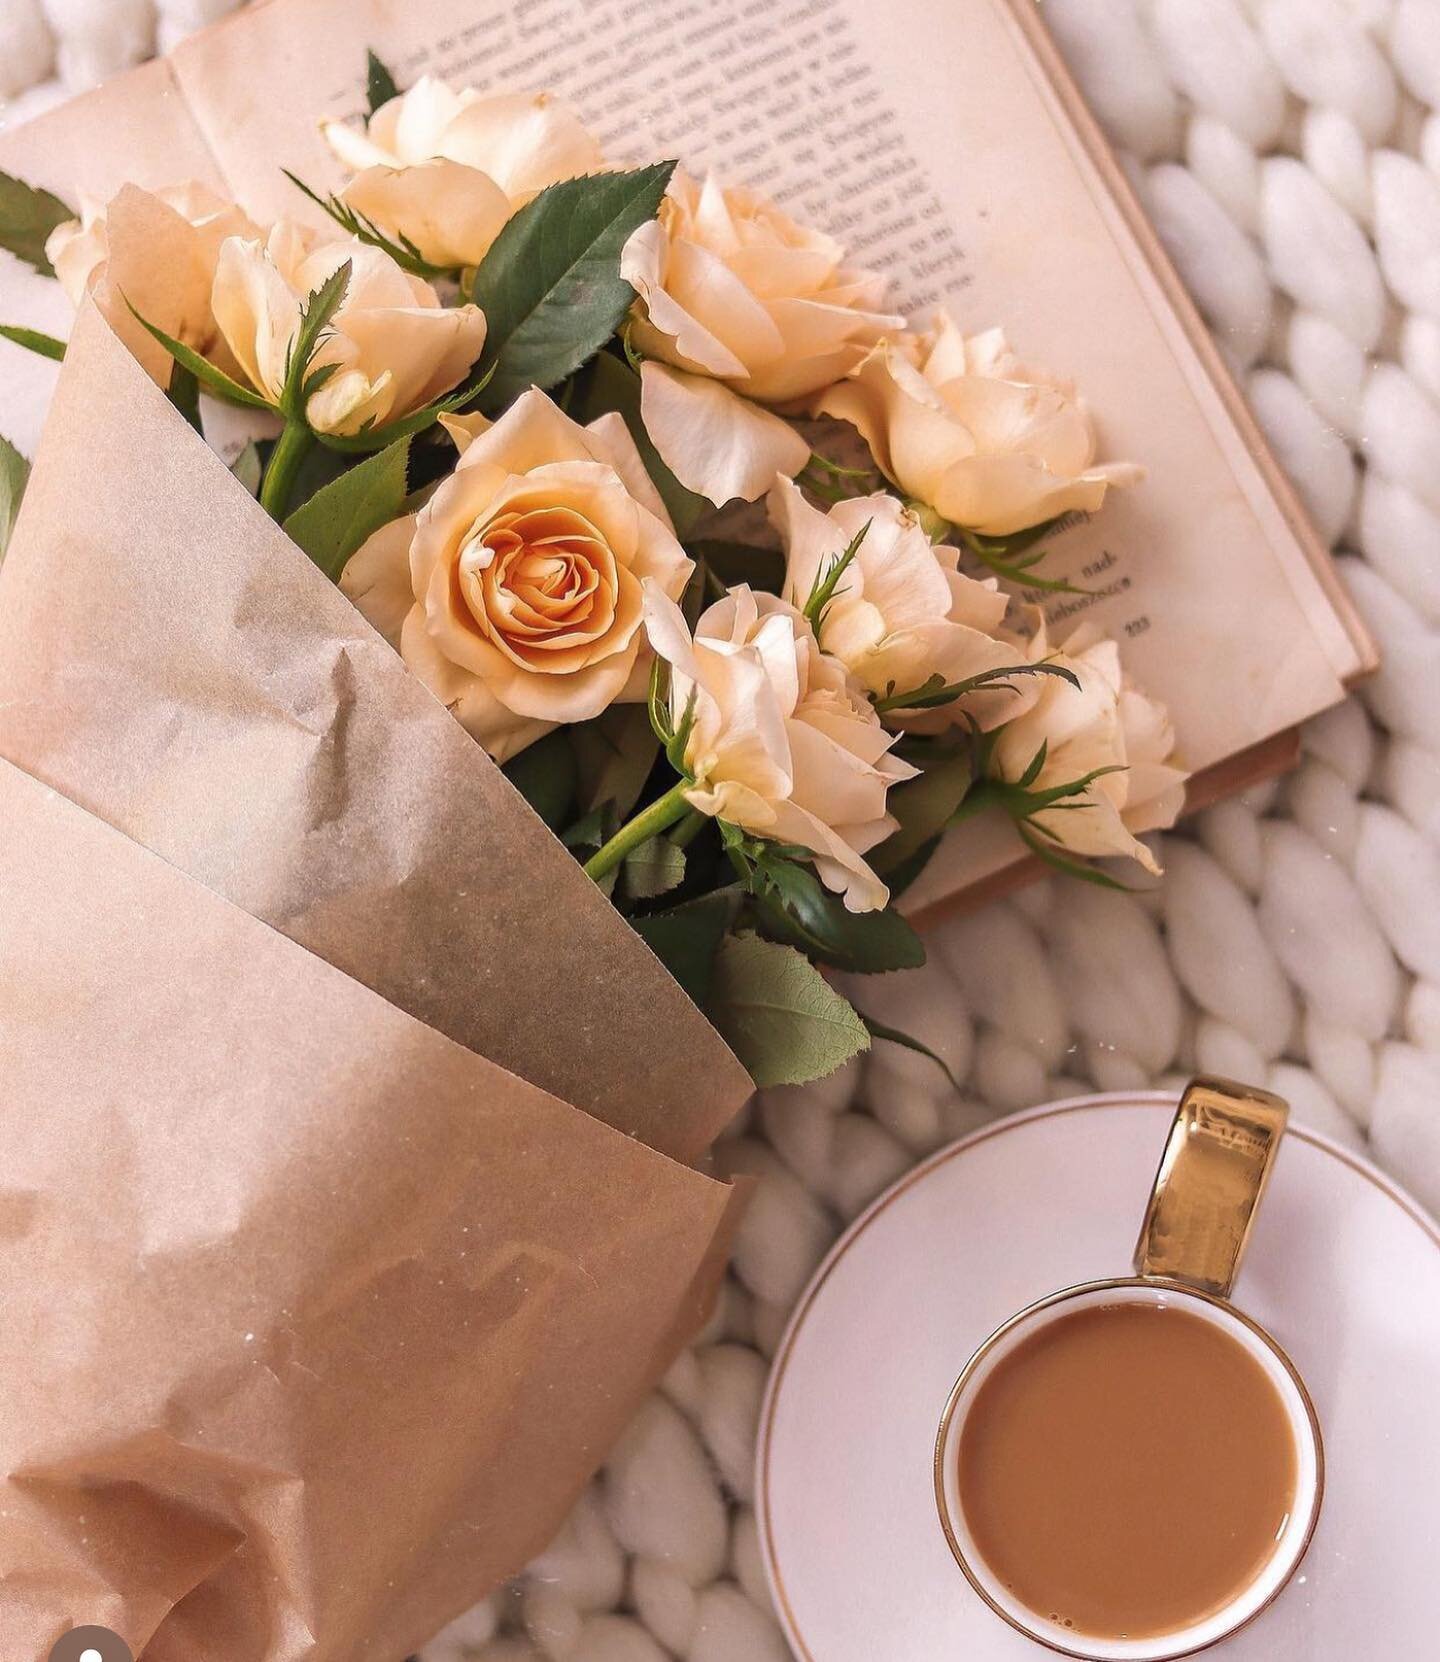 There&rsquo;s just something about coffee and flowers 💐
📸 @ulotne.nastroje 

#Friday #Coffee #Flowers #GoodVibesOnly #Positive #Positivity #Let&rsquo;sDoThis #FridayVibes #Relax